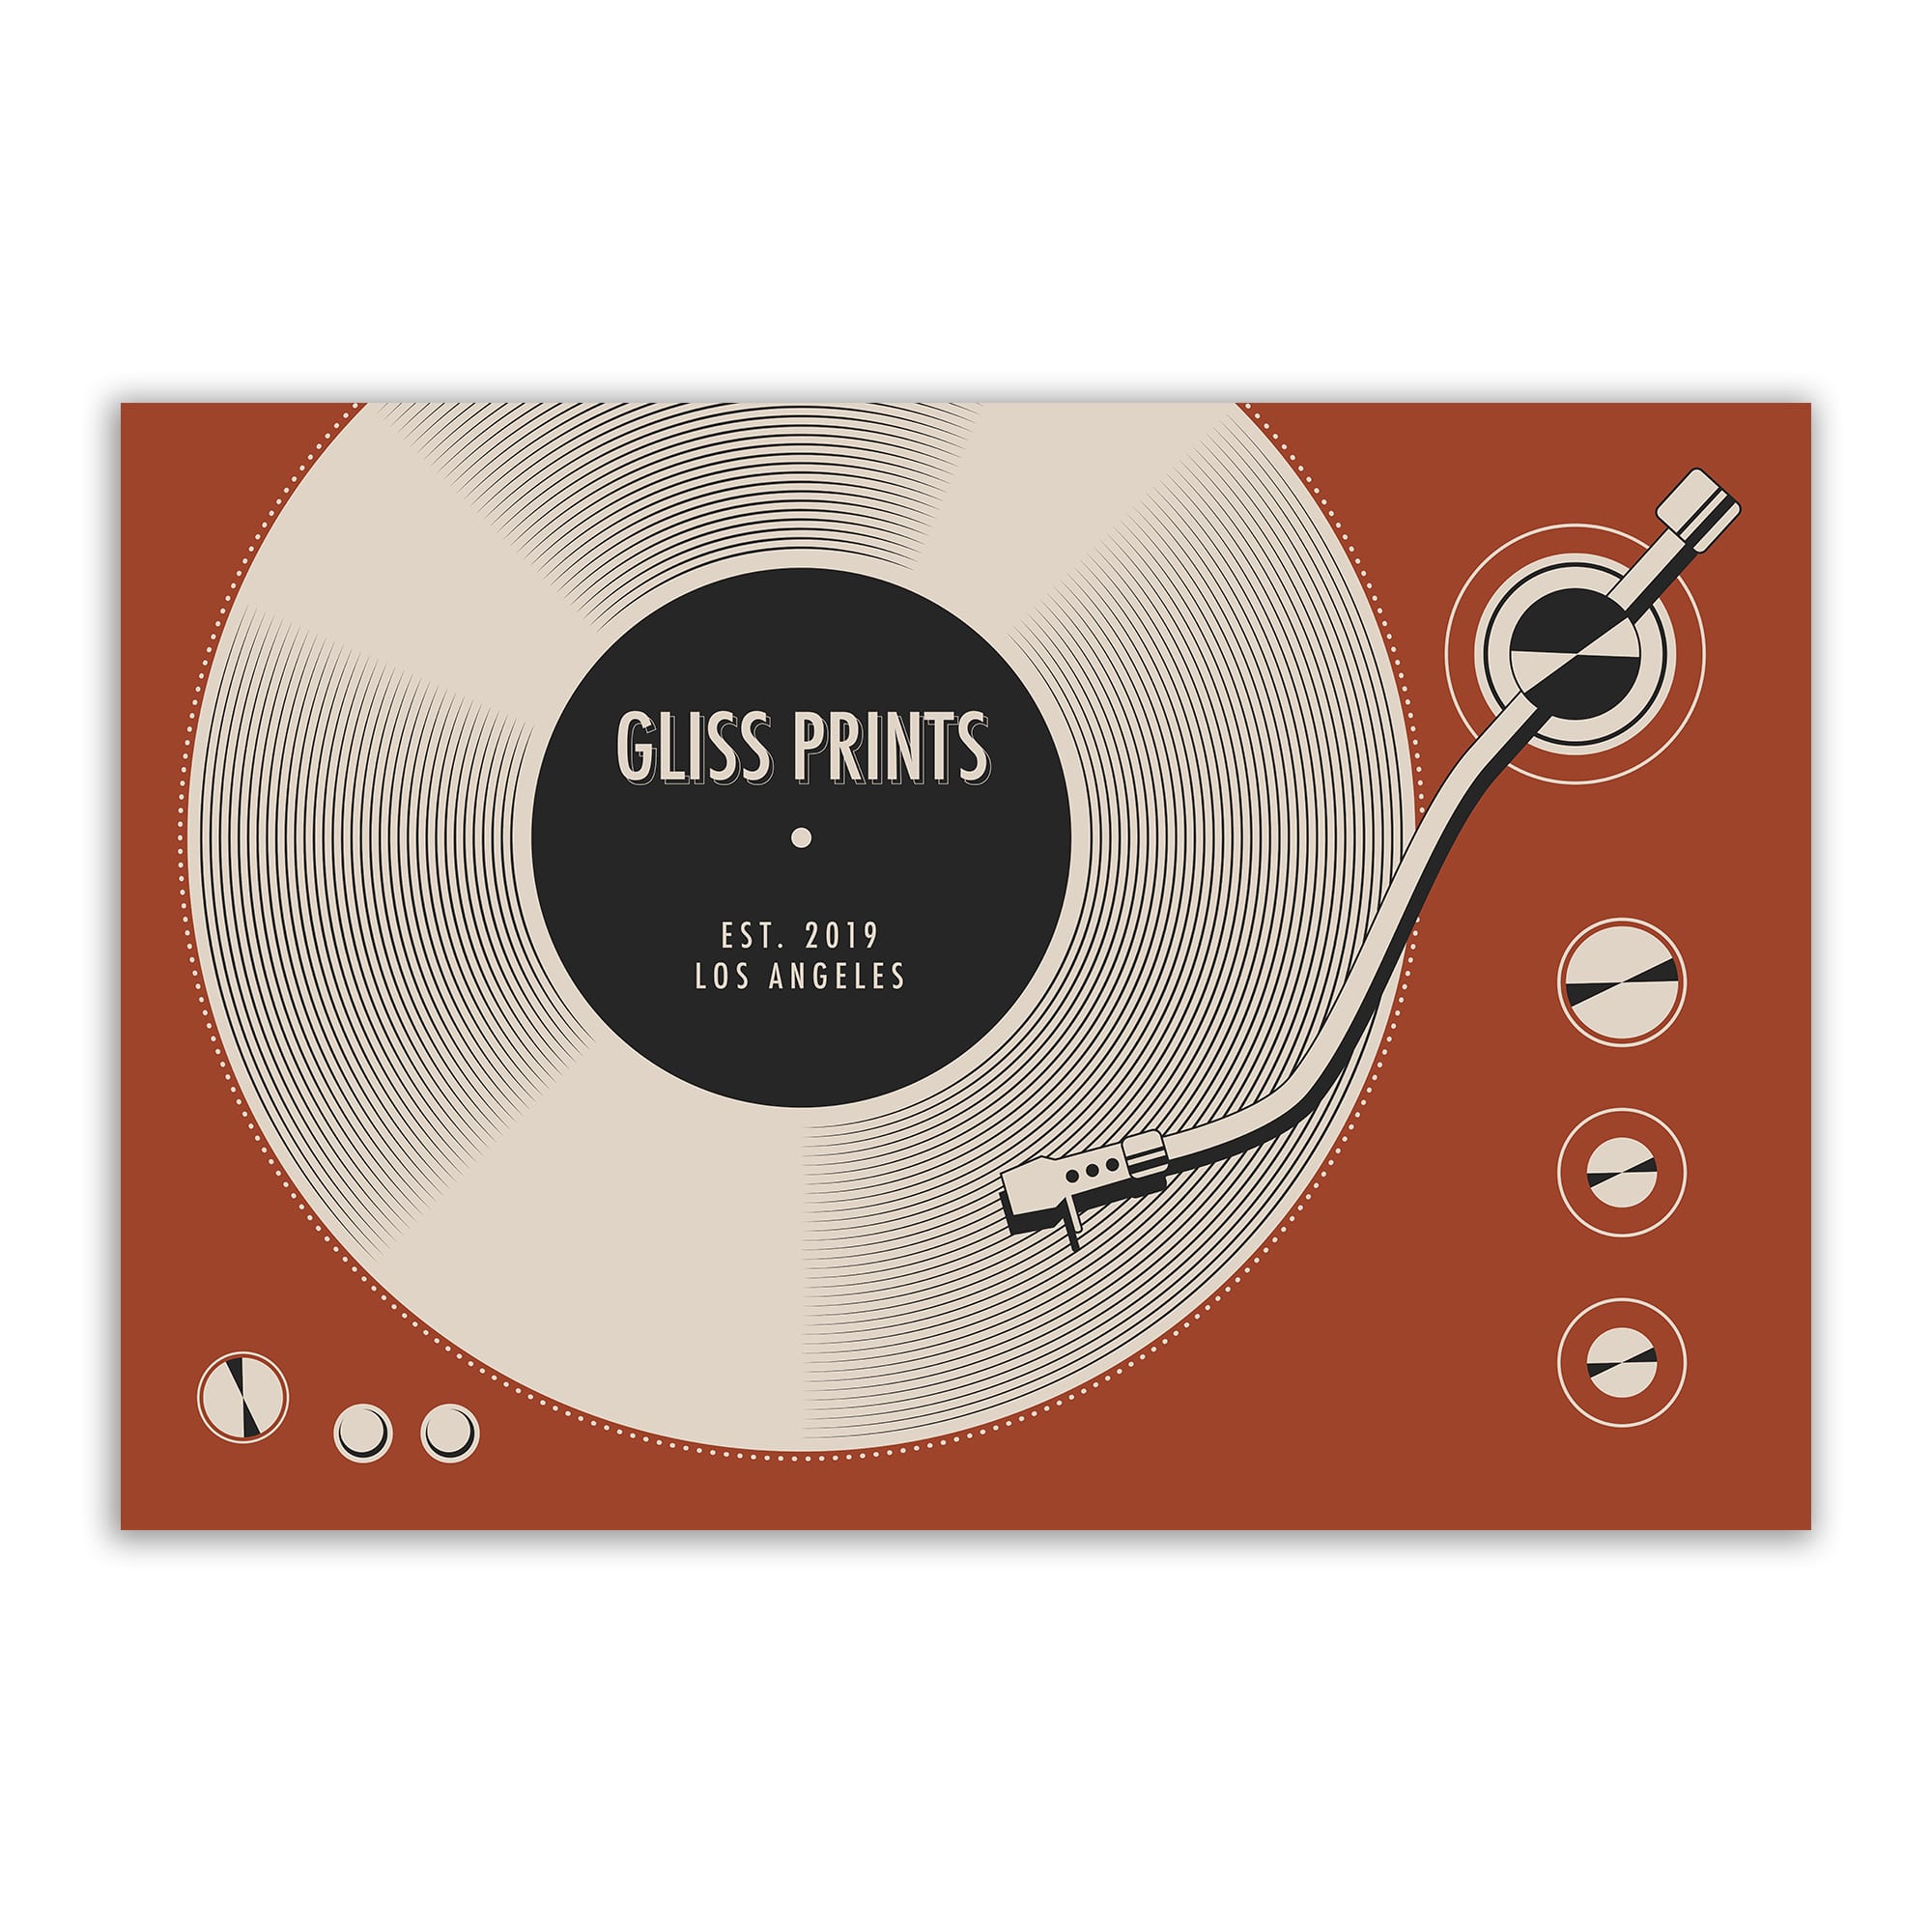 Custom Vinyl Record Poster | Personalized Print, Red